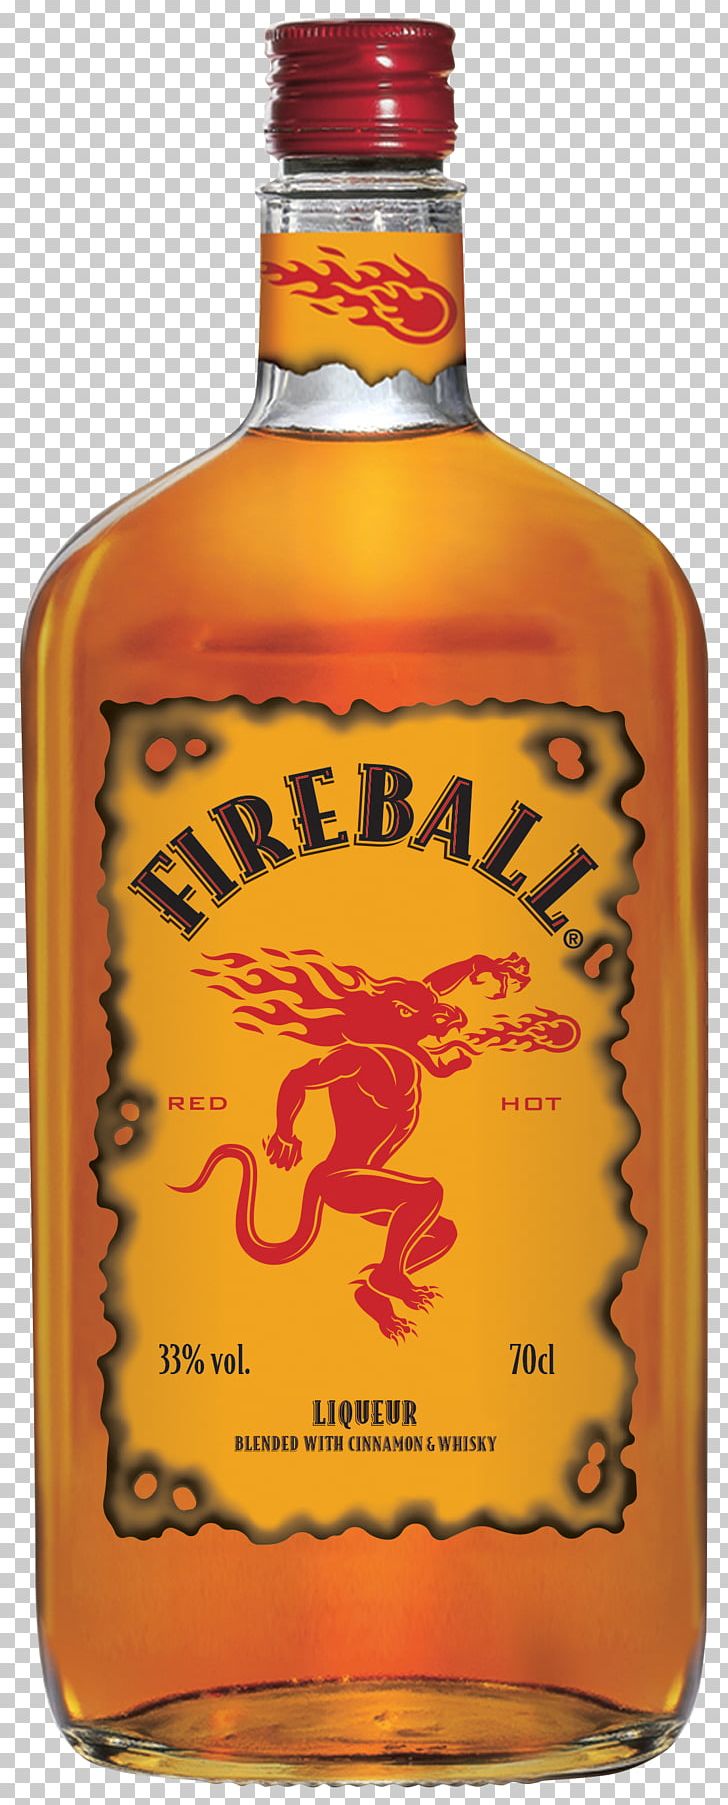 Fireball Cinnamon Whisky Distilled Beverage Whiskey Liqueur Apple Cider PNG, Clipart,  Free PNG Download